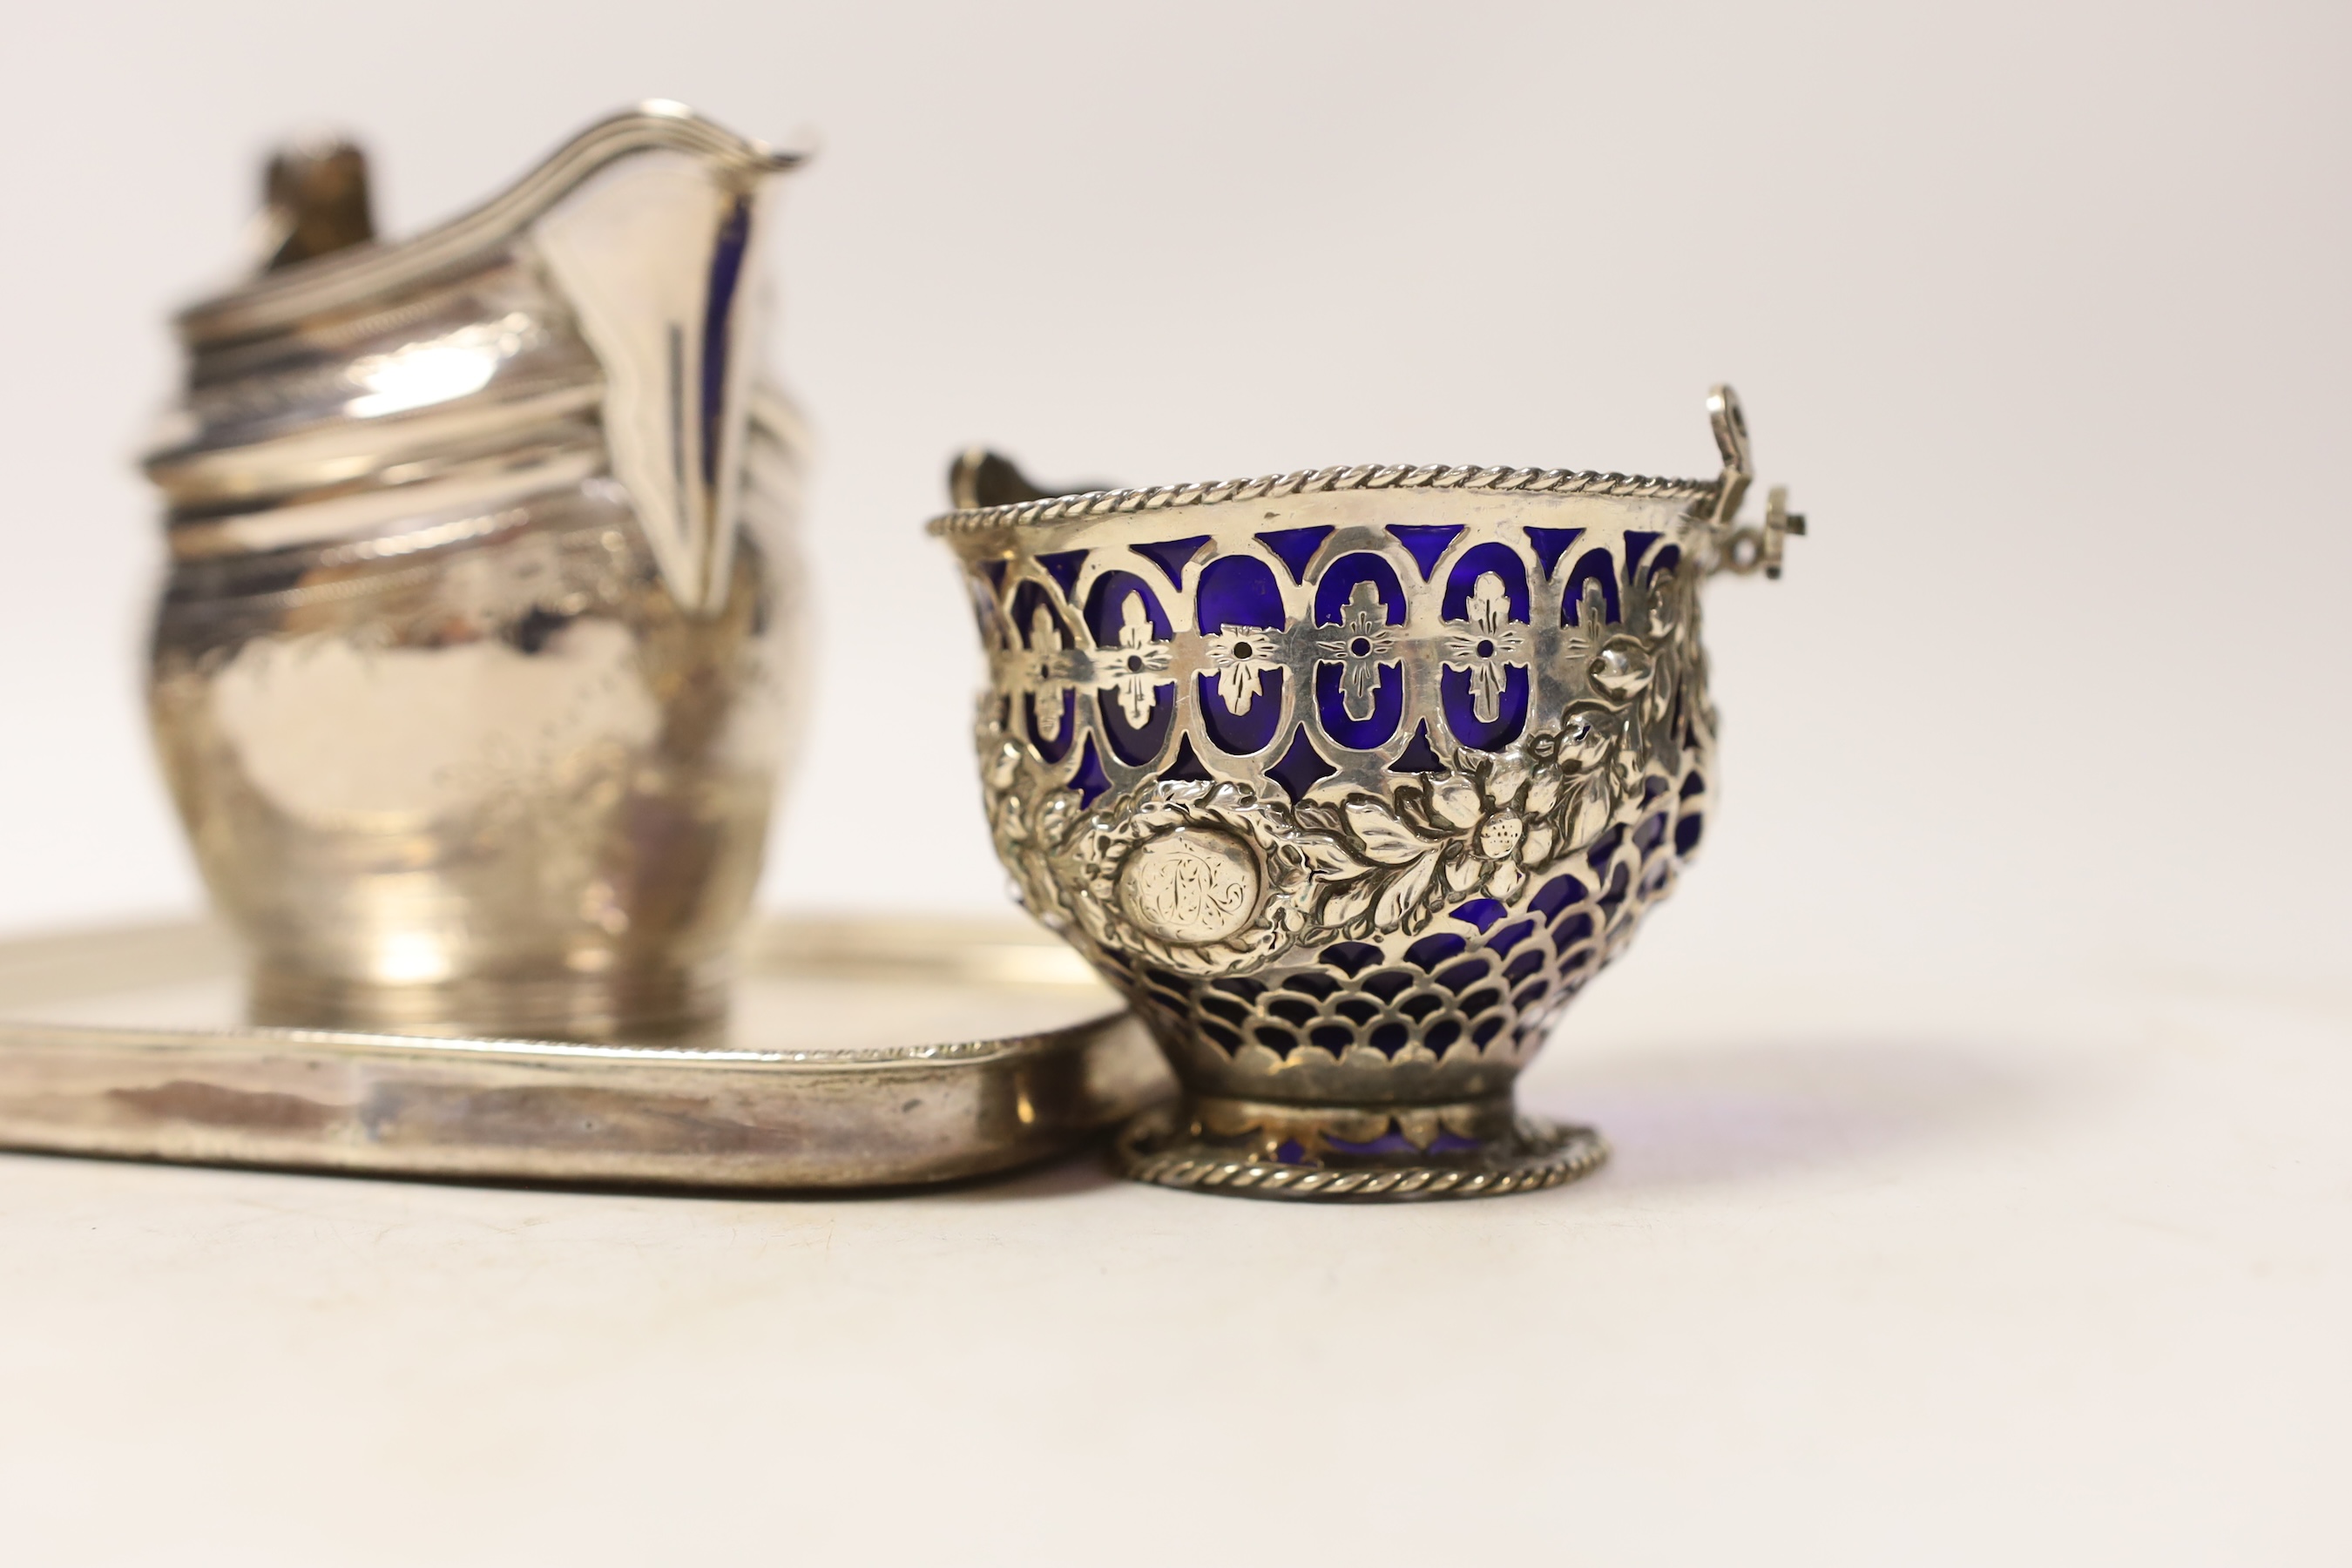 A George III engraved silver helmet shaped cream jug, London, 1801, height 10.5cm, a small George III pieced silver sugar basket? (liner a.f.), London, 1770, a George III silver mounted teapot stand, London, 1808 and a s